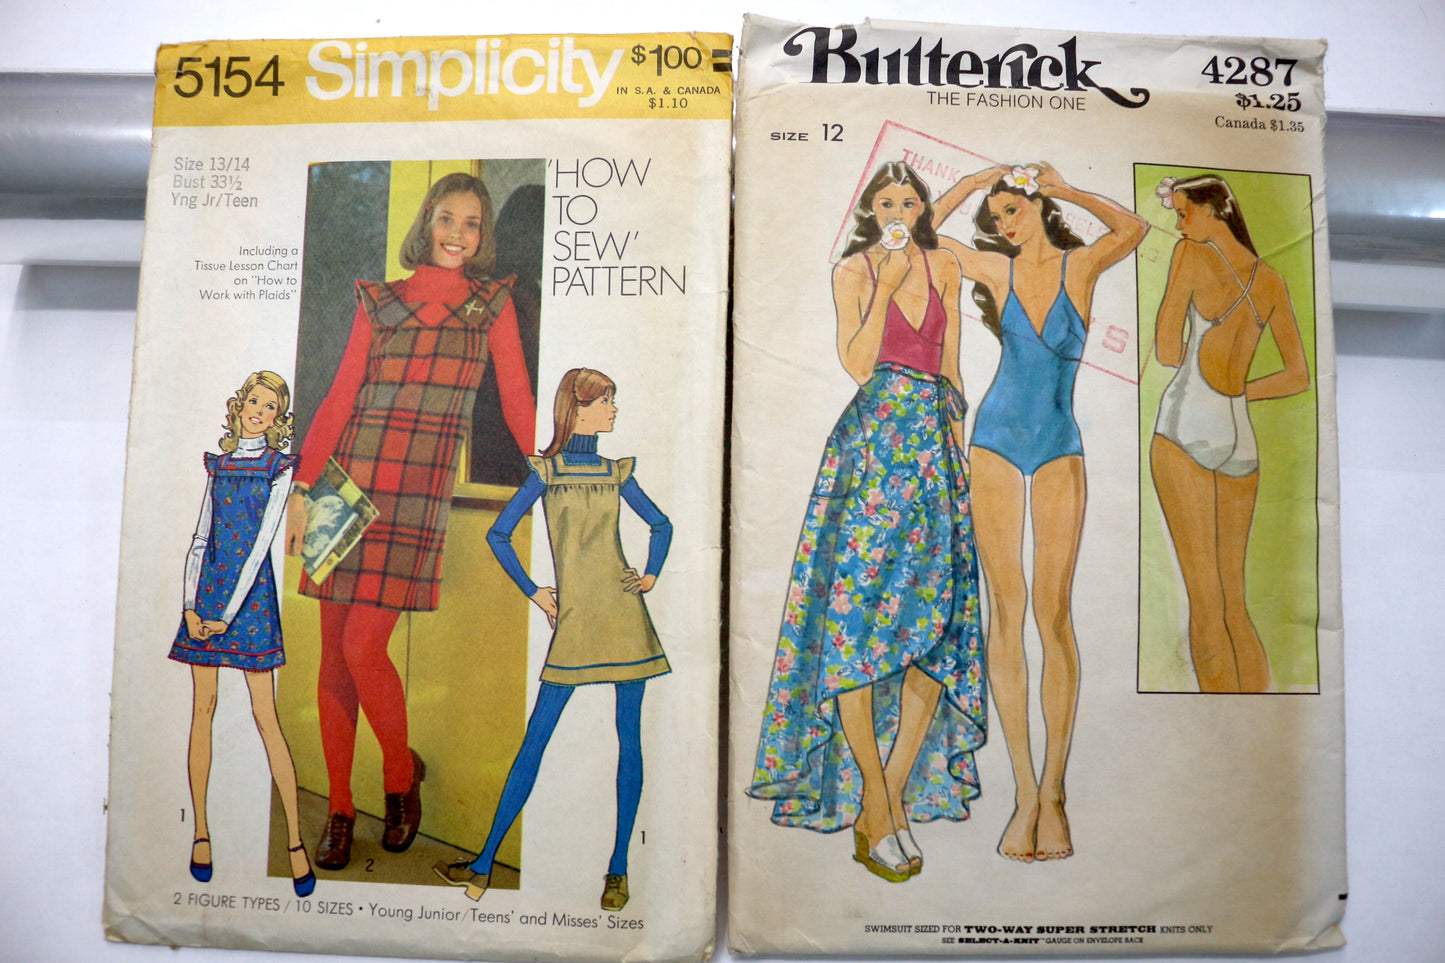 Simplicity 5154 Sewing Pattern or Butterick 4287 Sewing Pattern